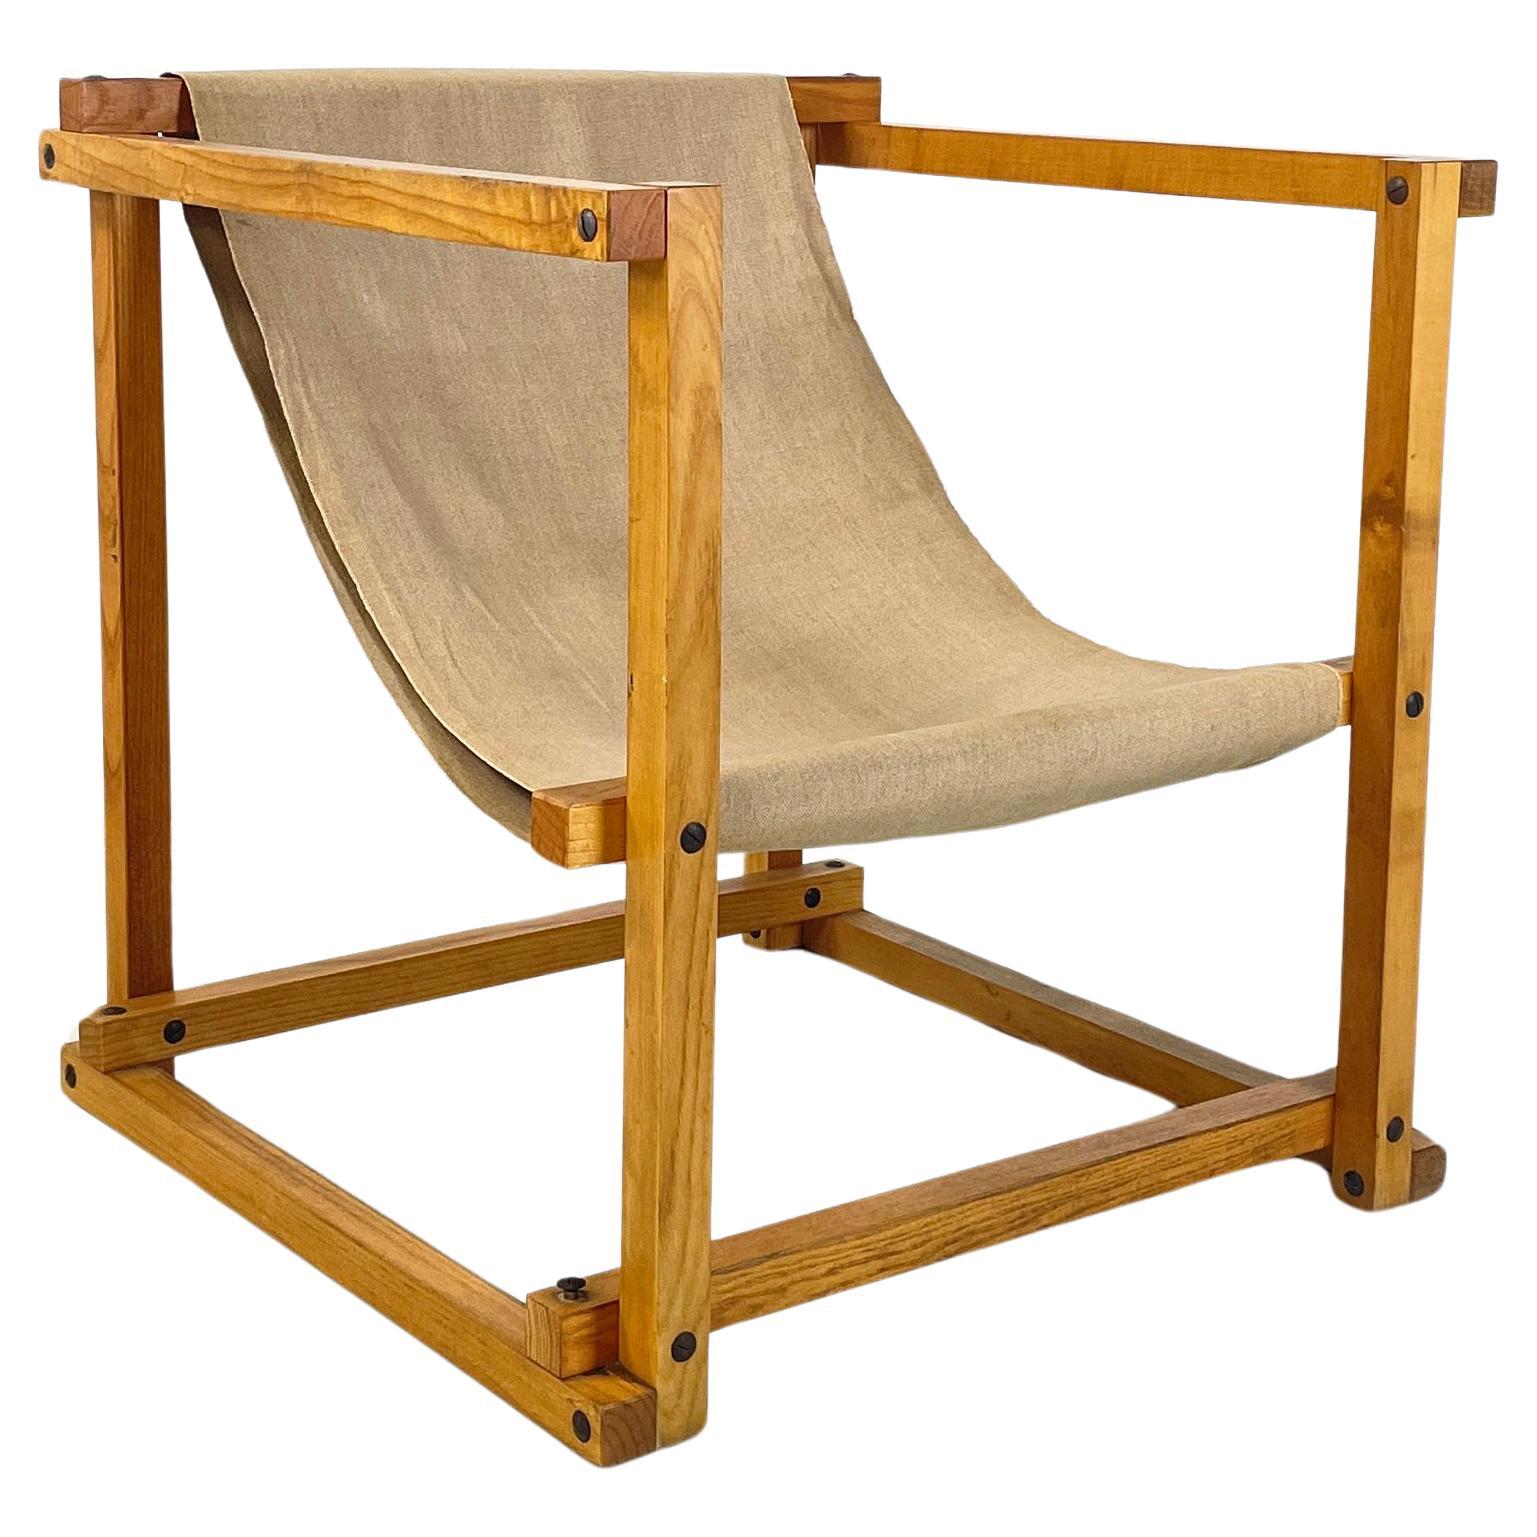 Italian mid-century modern Wood armchair with beige fabric by Pino Pedano, 1970s For Sale